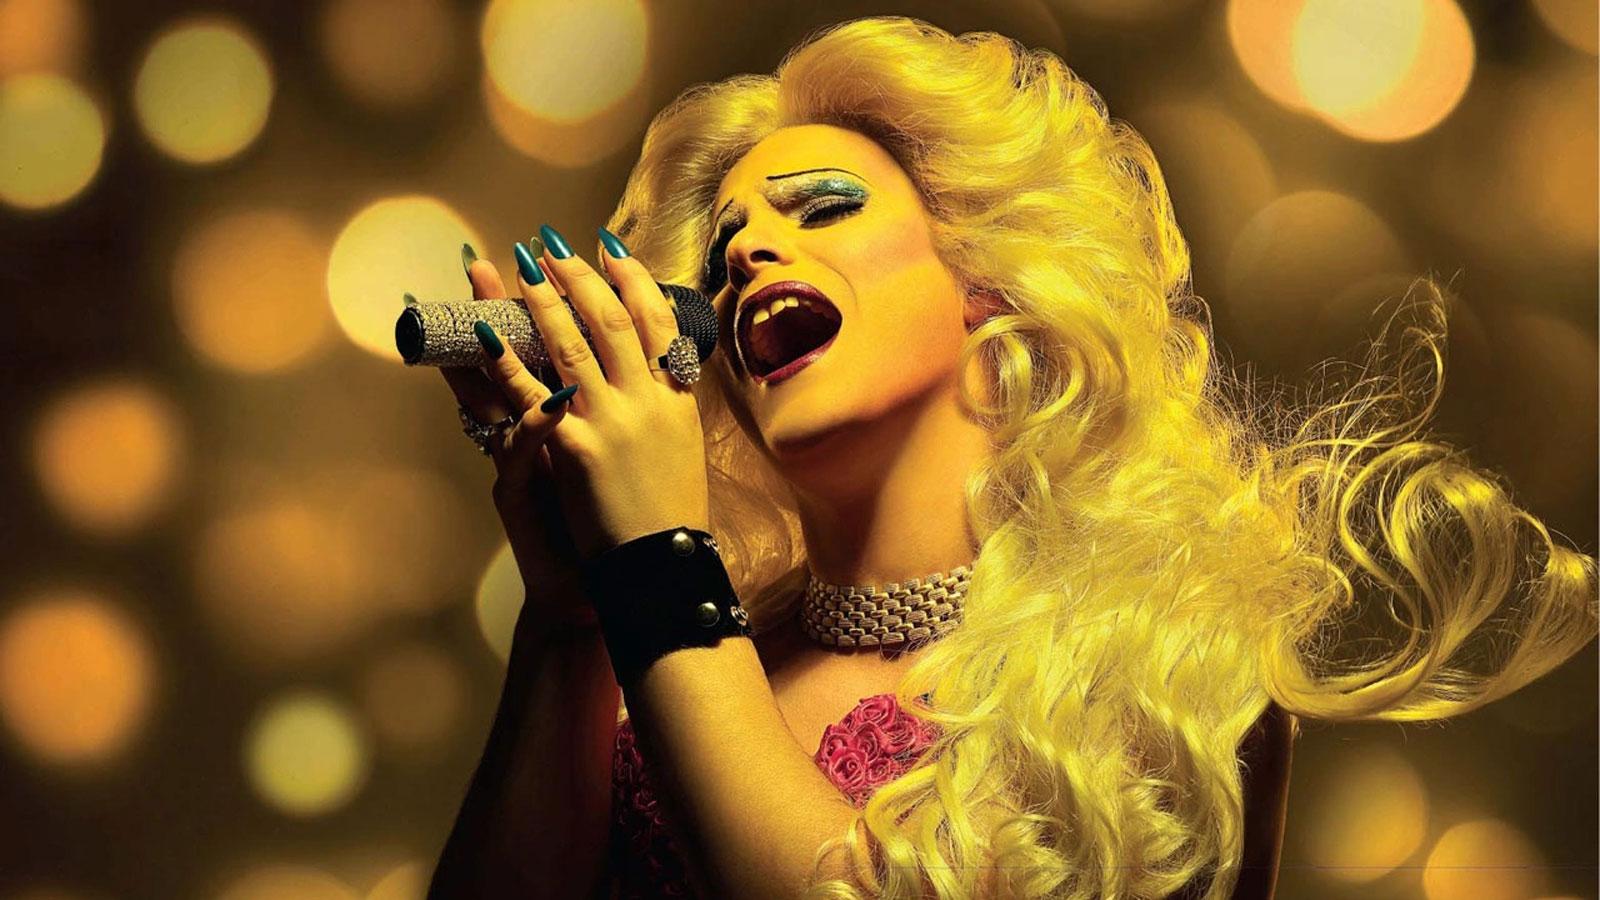 Scene from the film Hedwig and the Angry Inch